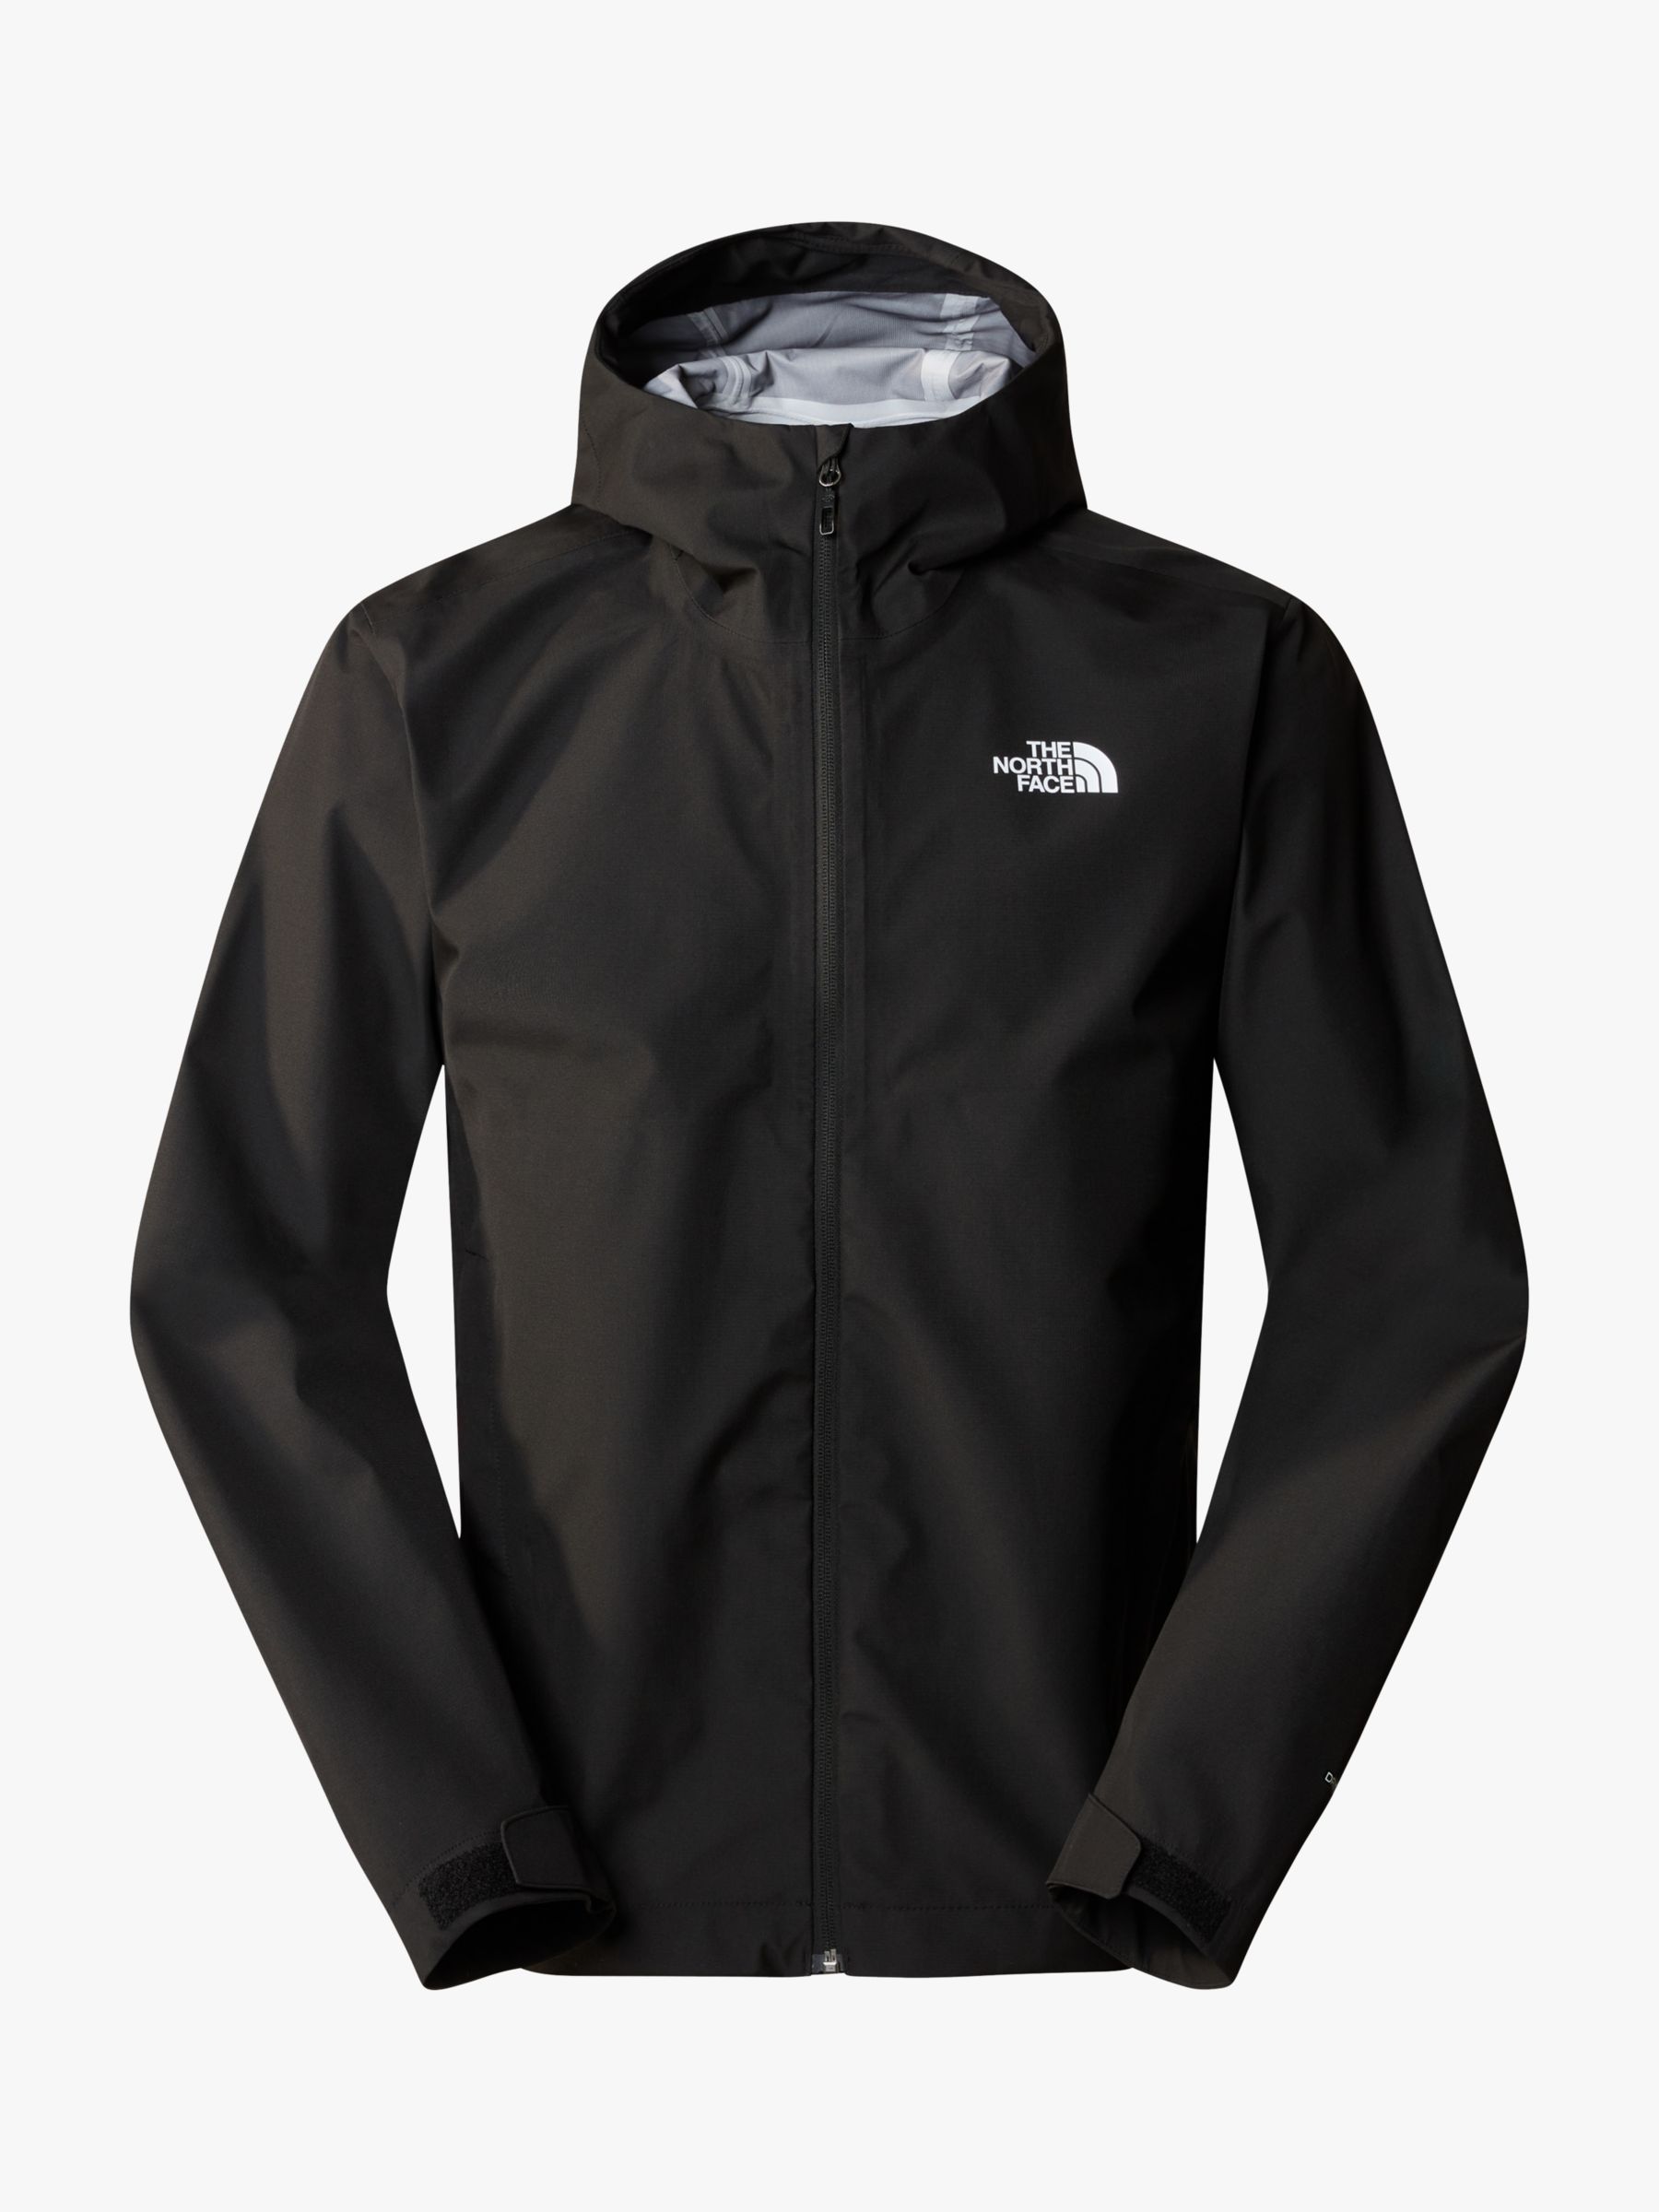 The North Face Whiton 3 Layer Jacket, Tnf Black, XL